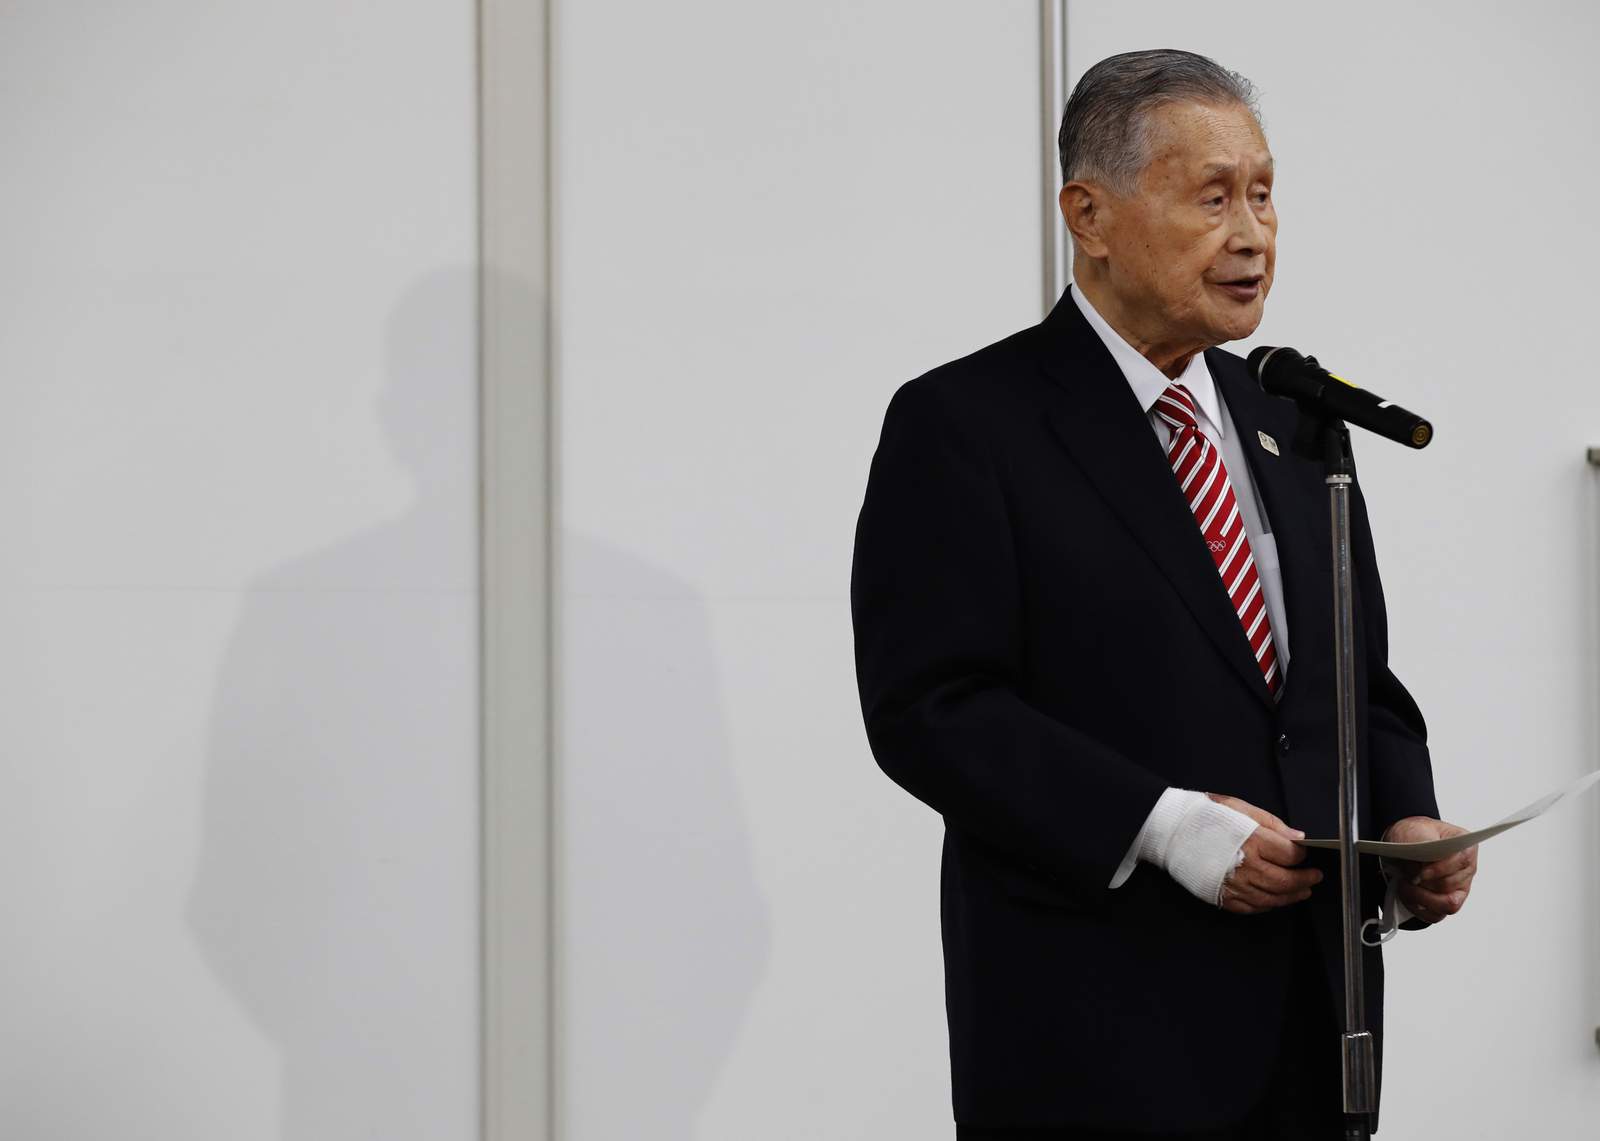 Reports: Mori to resign Tokyo Olympics over sexist remarks